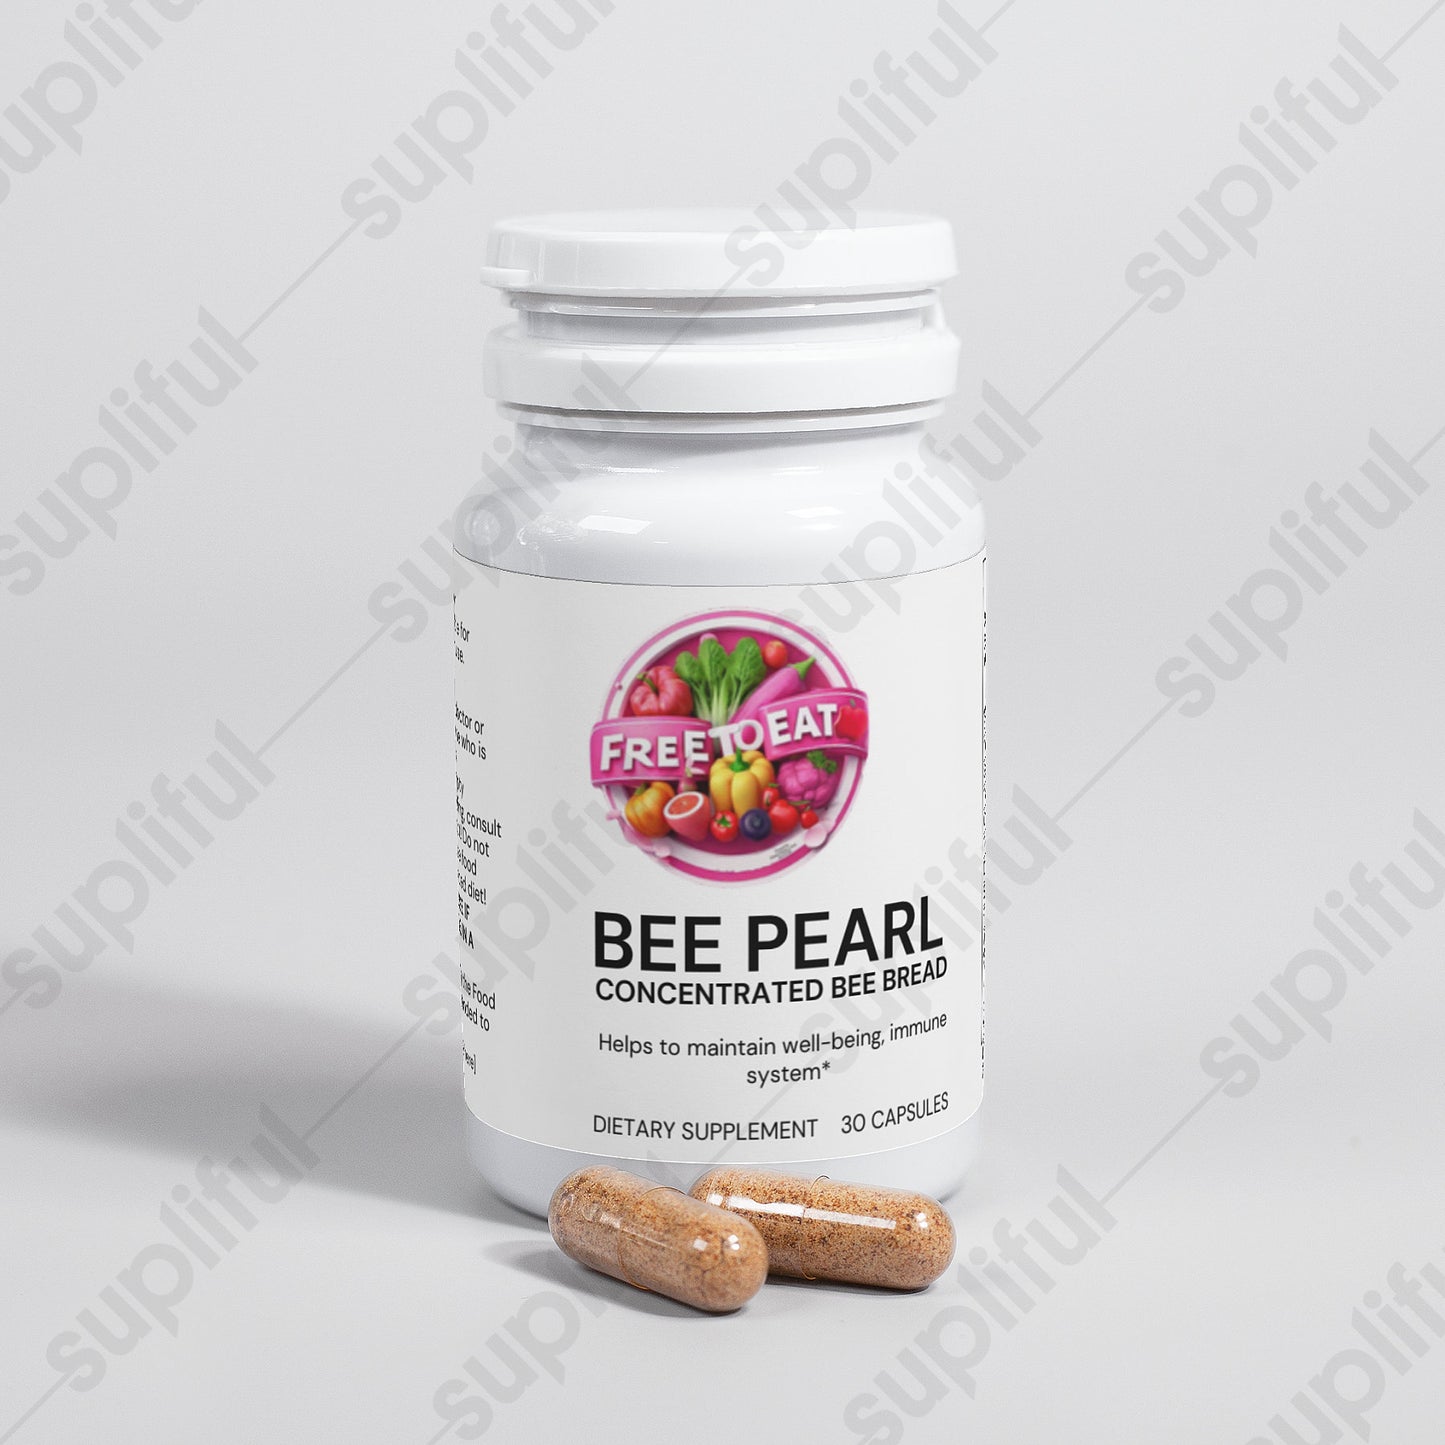 Free To Eat: Bee Pearl